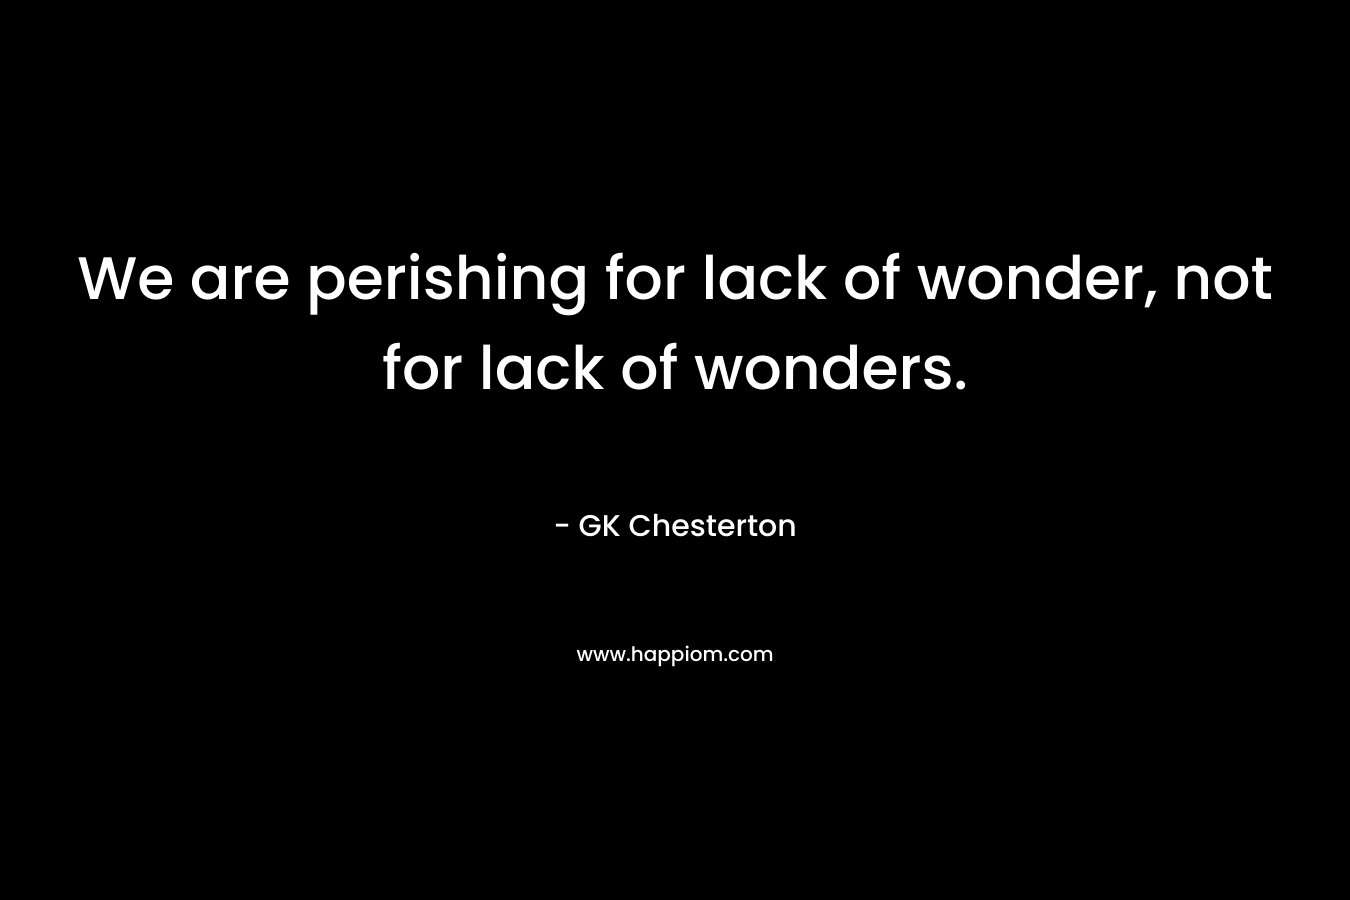 We are perishing for lack of wonder, not for lack of wonders.